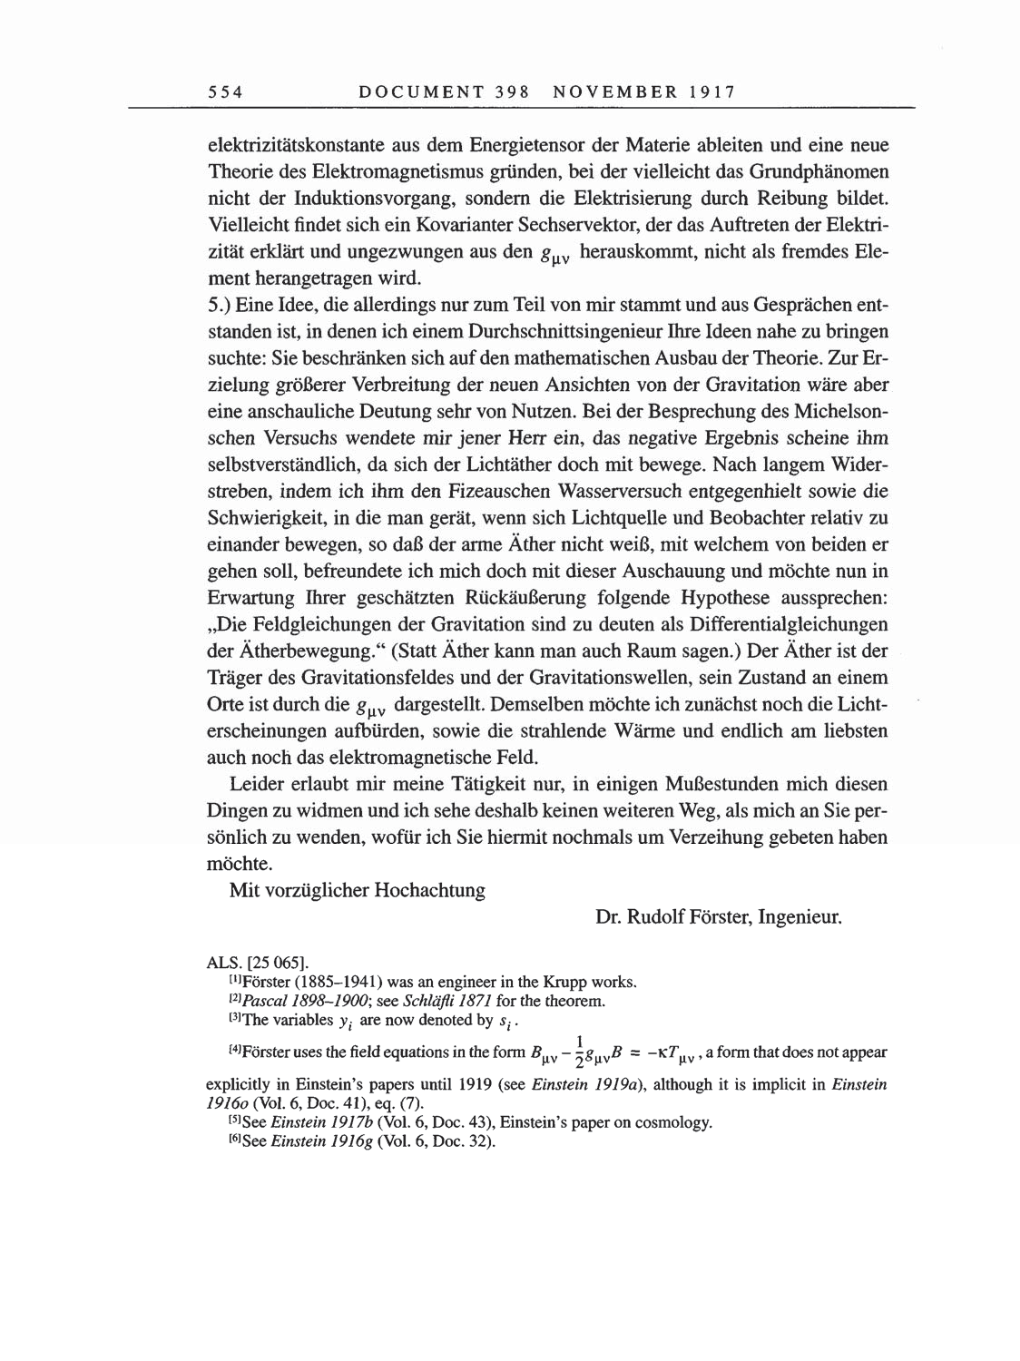 Volume 8, Part A: The Berlin Years: Correspondence 1914-1917 page 554